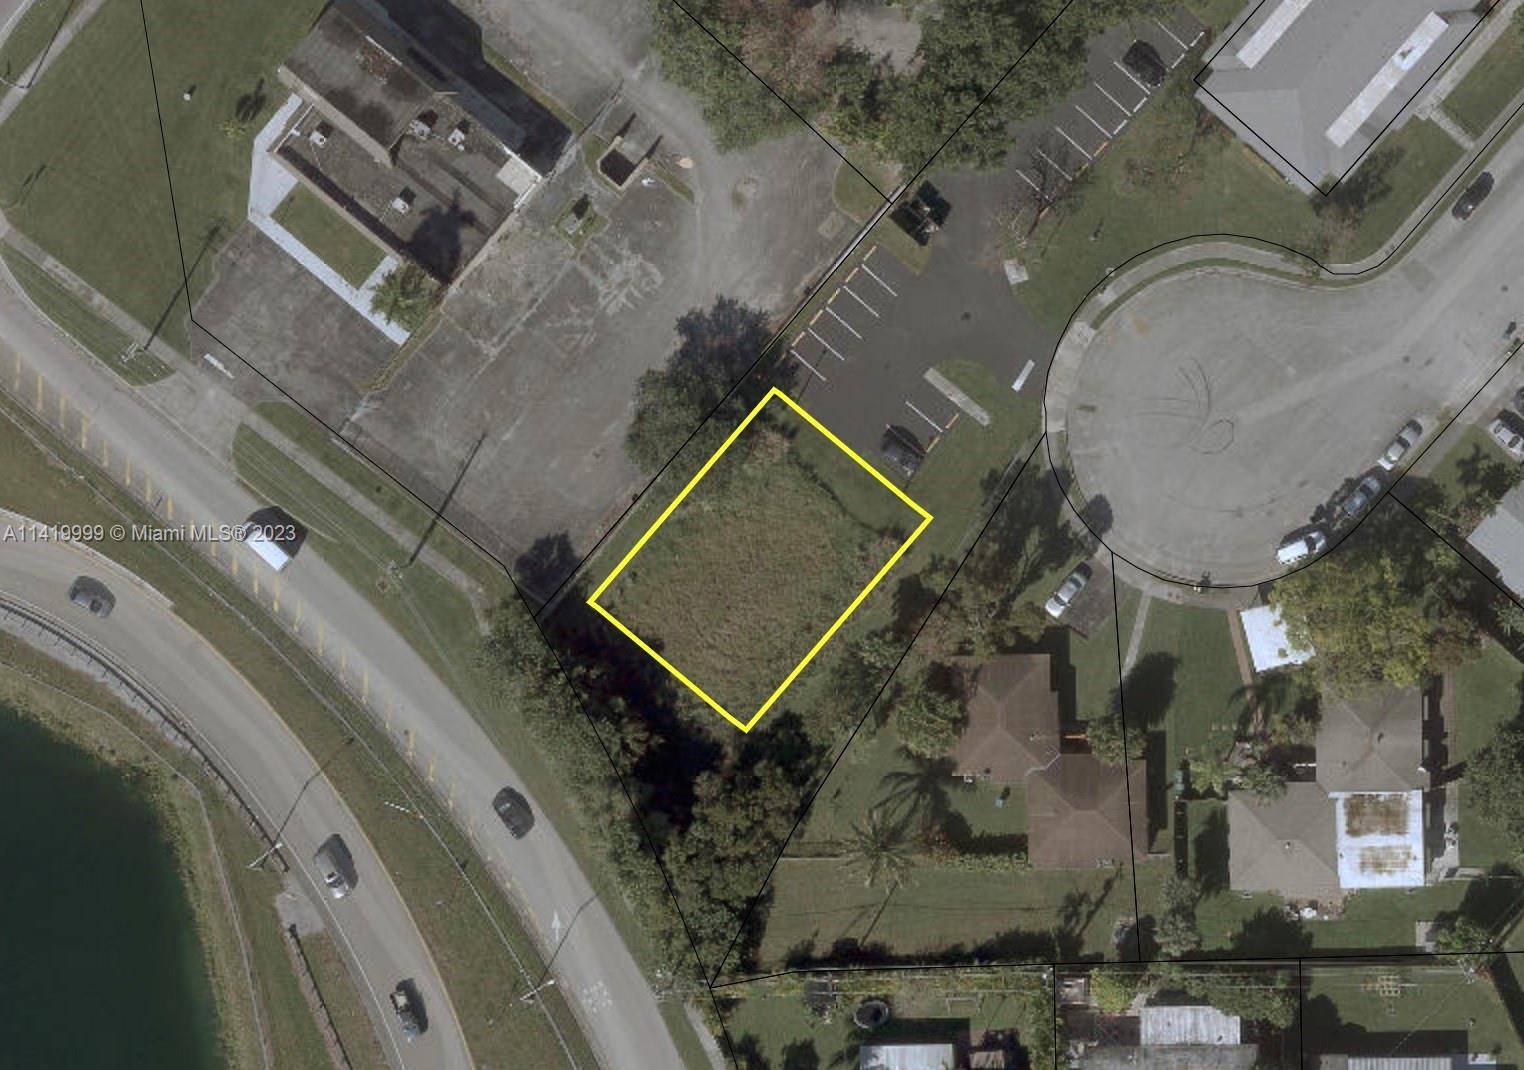 An investment opportunity located in one of Cutler Bay's most promising areas, this lot presents incredible potential for visionary investors like yourself.